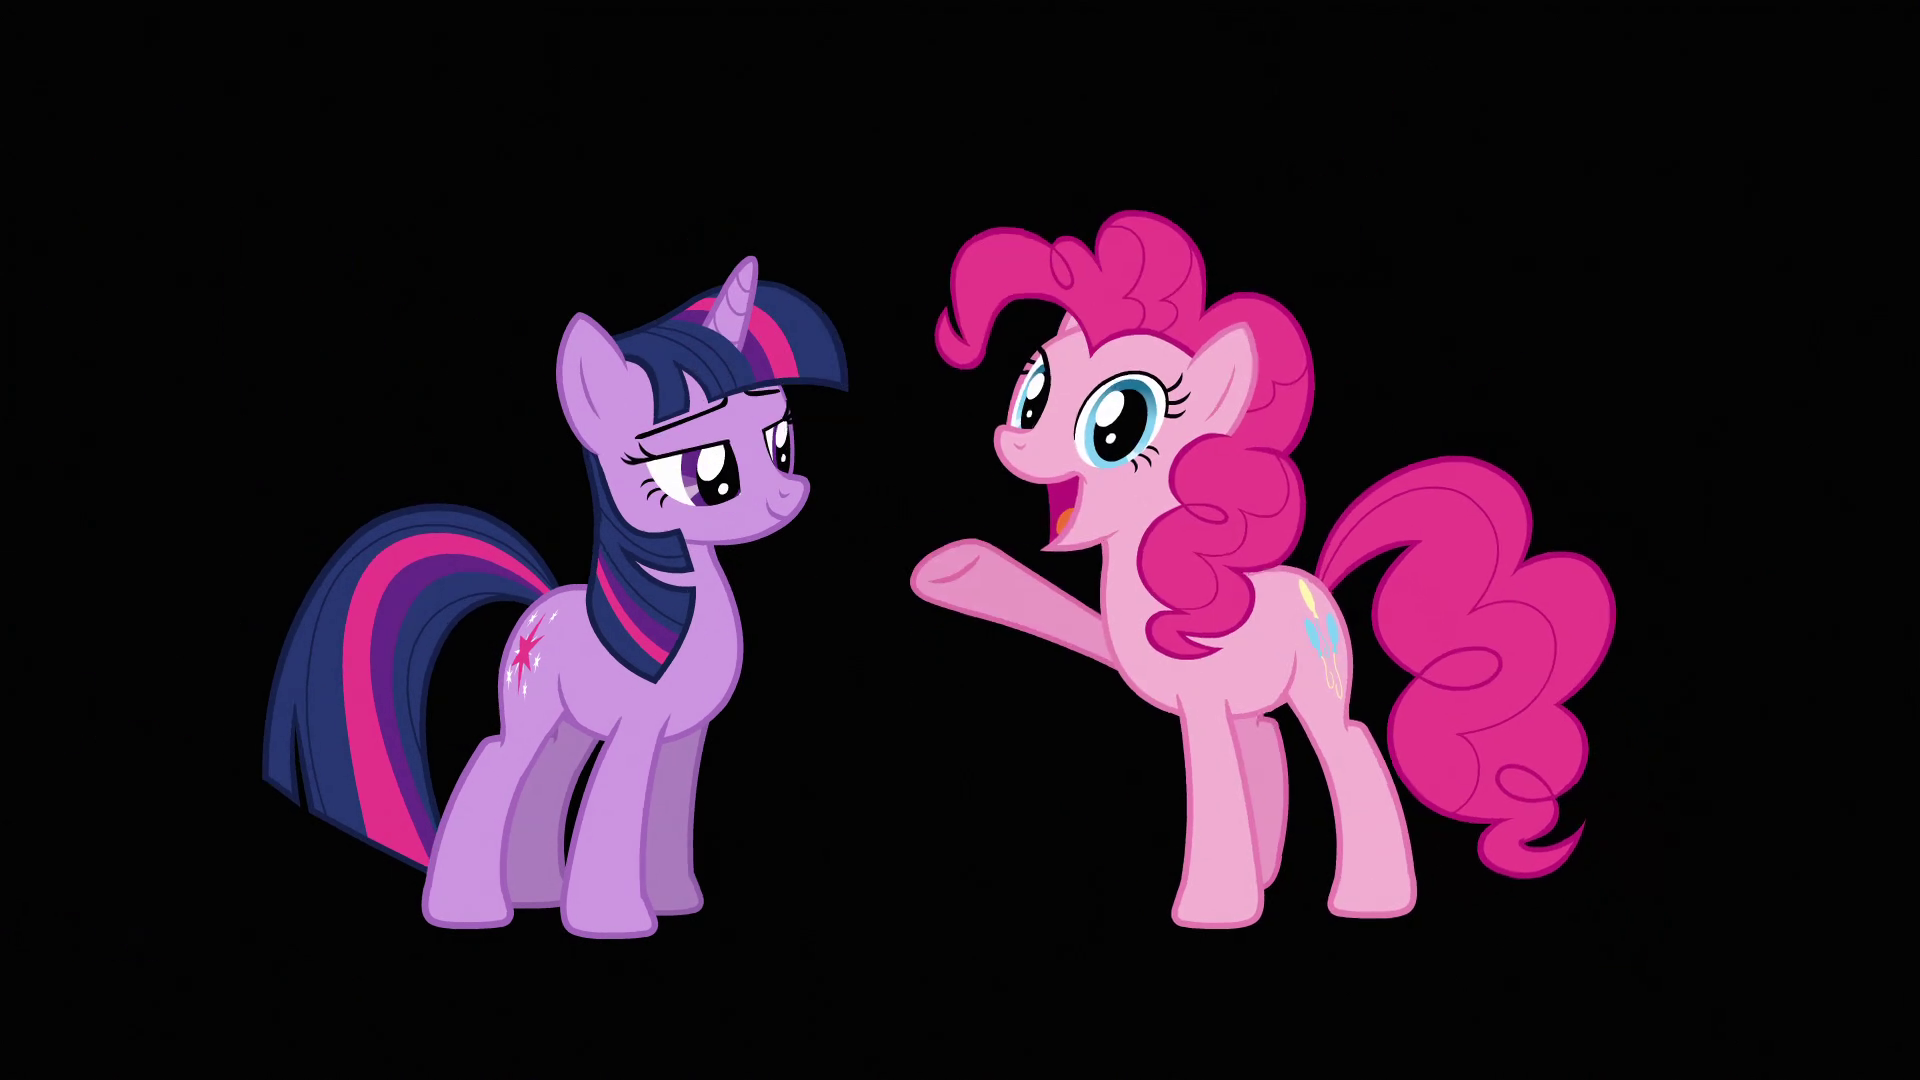 Pinkie_Pie_about_to_speak_after_acquiring_her_mouth_back_S3E05.png